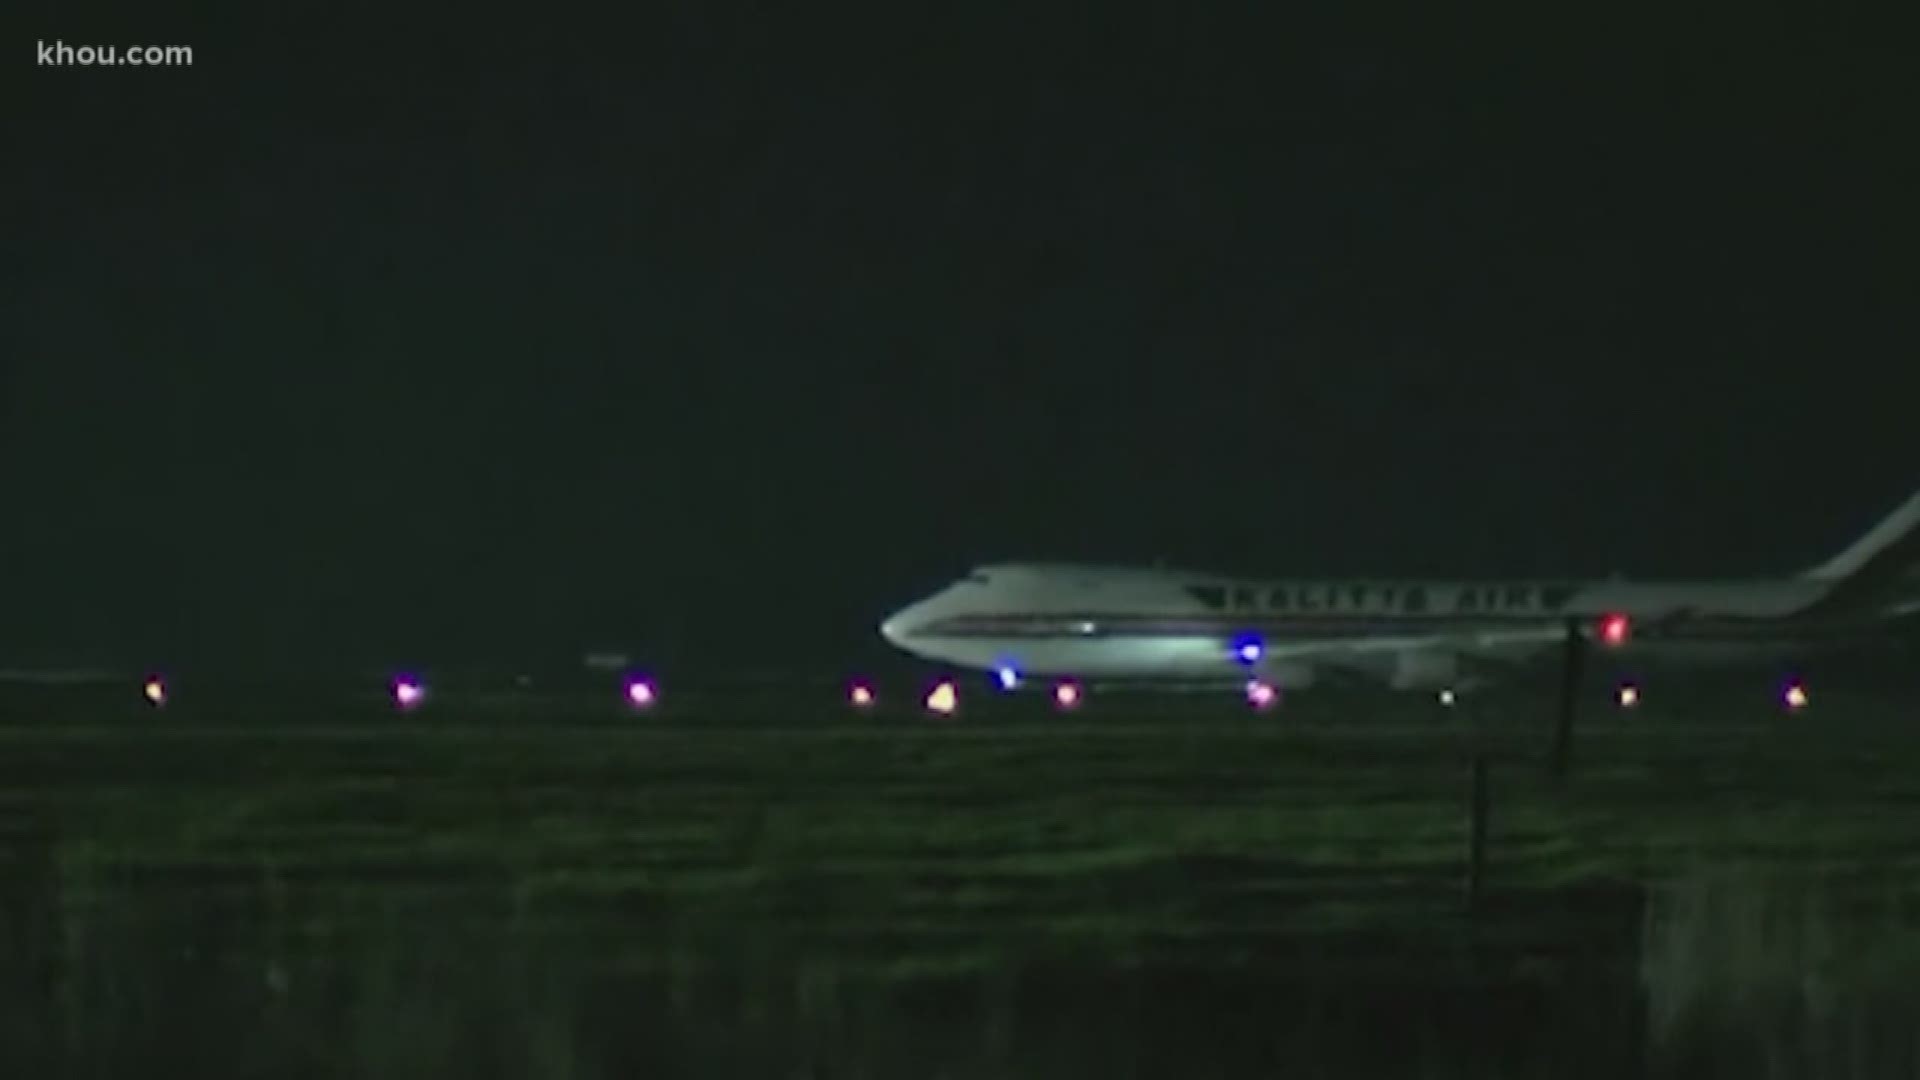 KHOU 11's Janel Forte reports on the latest with the virus outbreak in China. Two charter flights carrying cruise passengers from Japan landed at military bases.